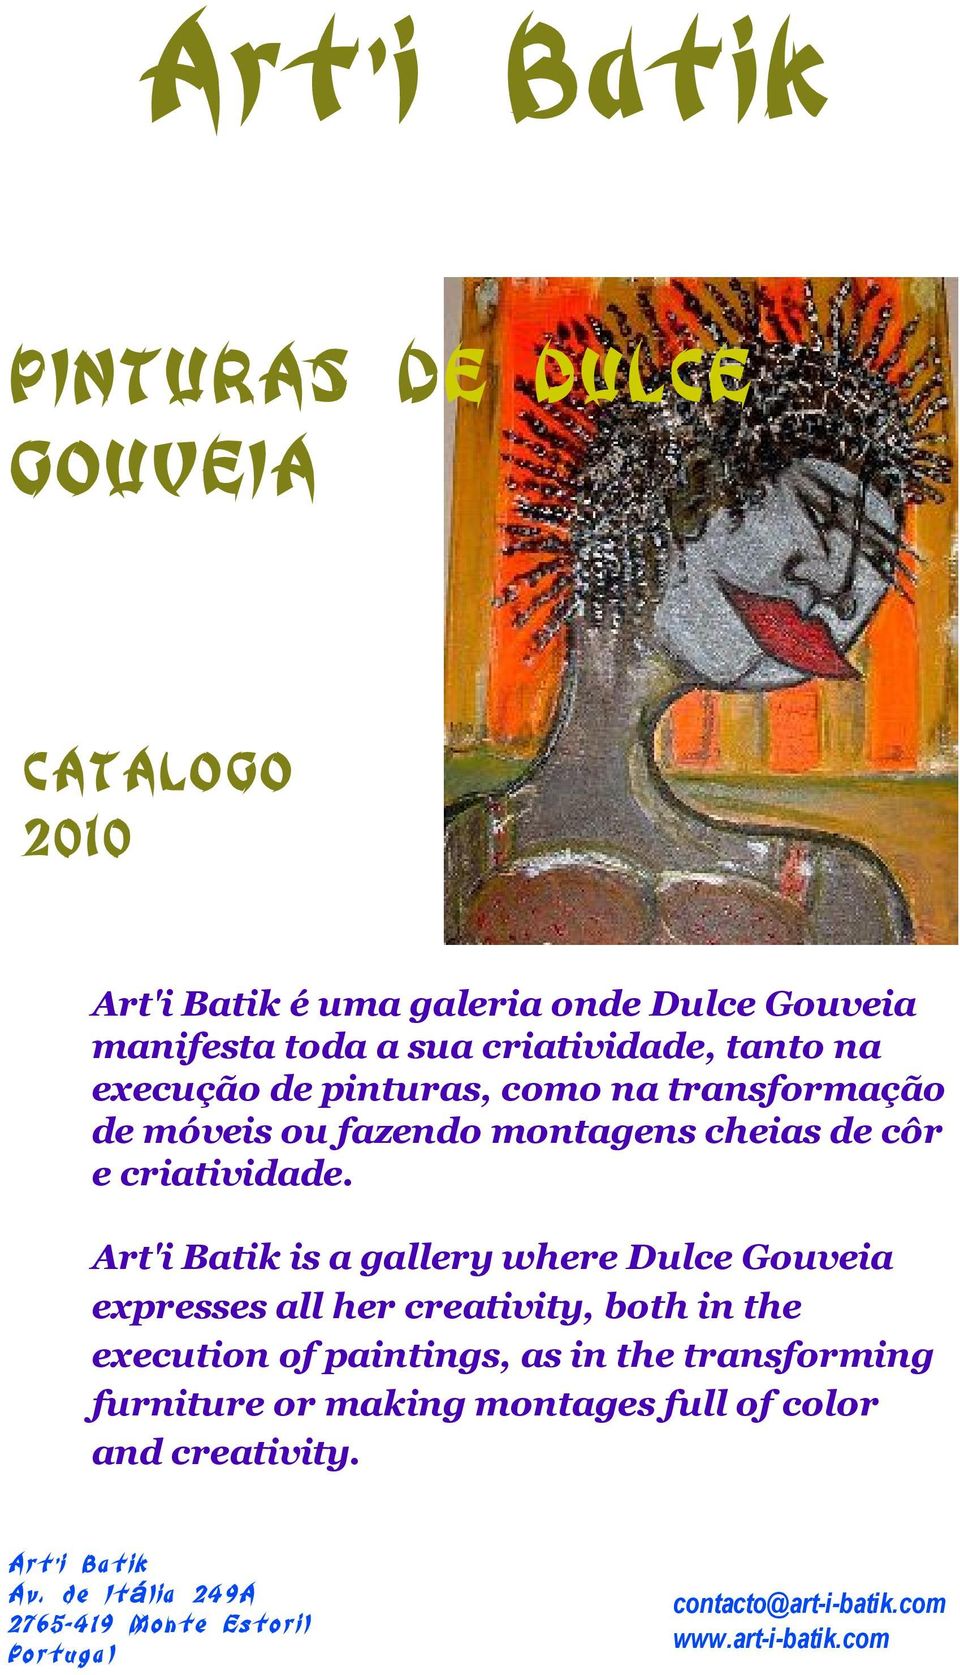 Art'i Batik is a gallery where Dulce Gouveia expresses all her creativity, both in the execution of paintings, as in the